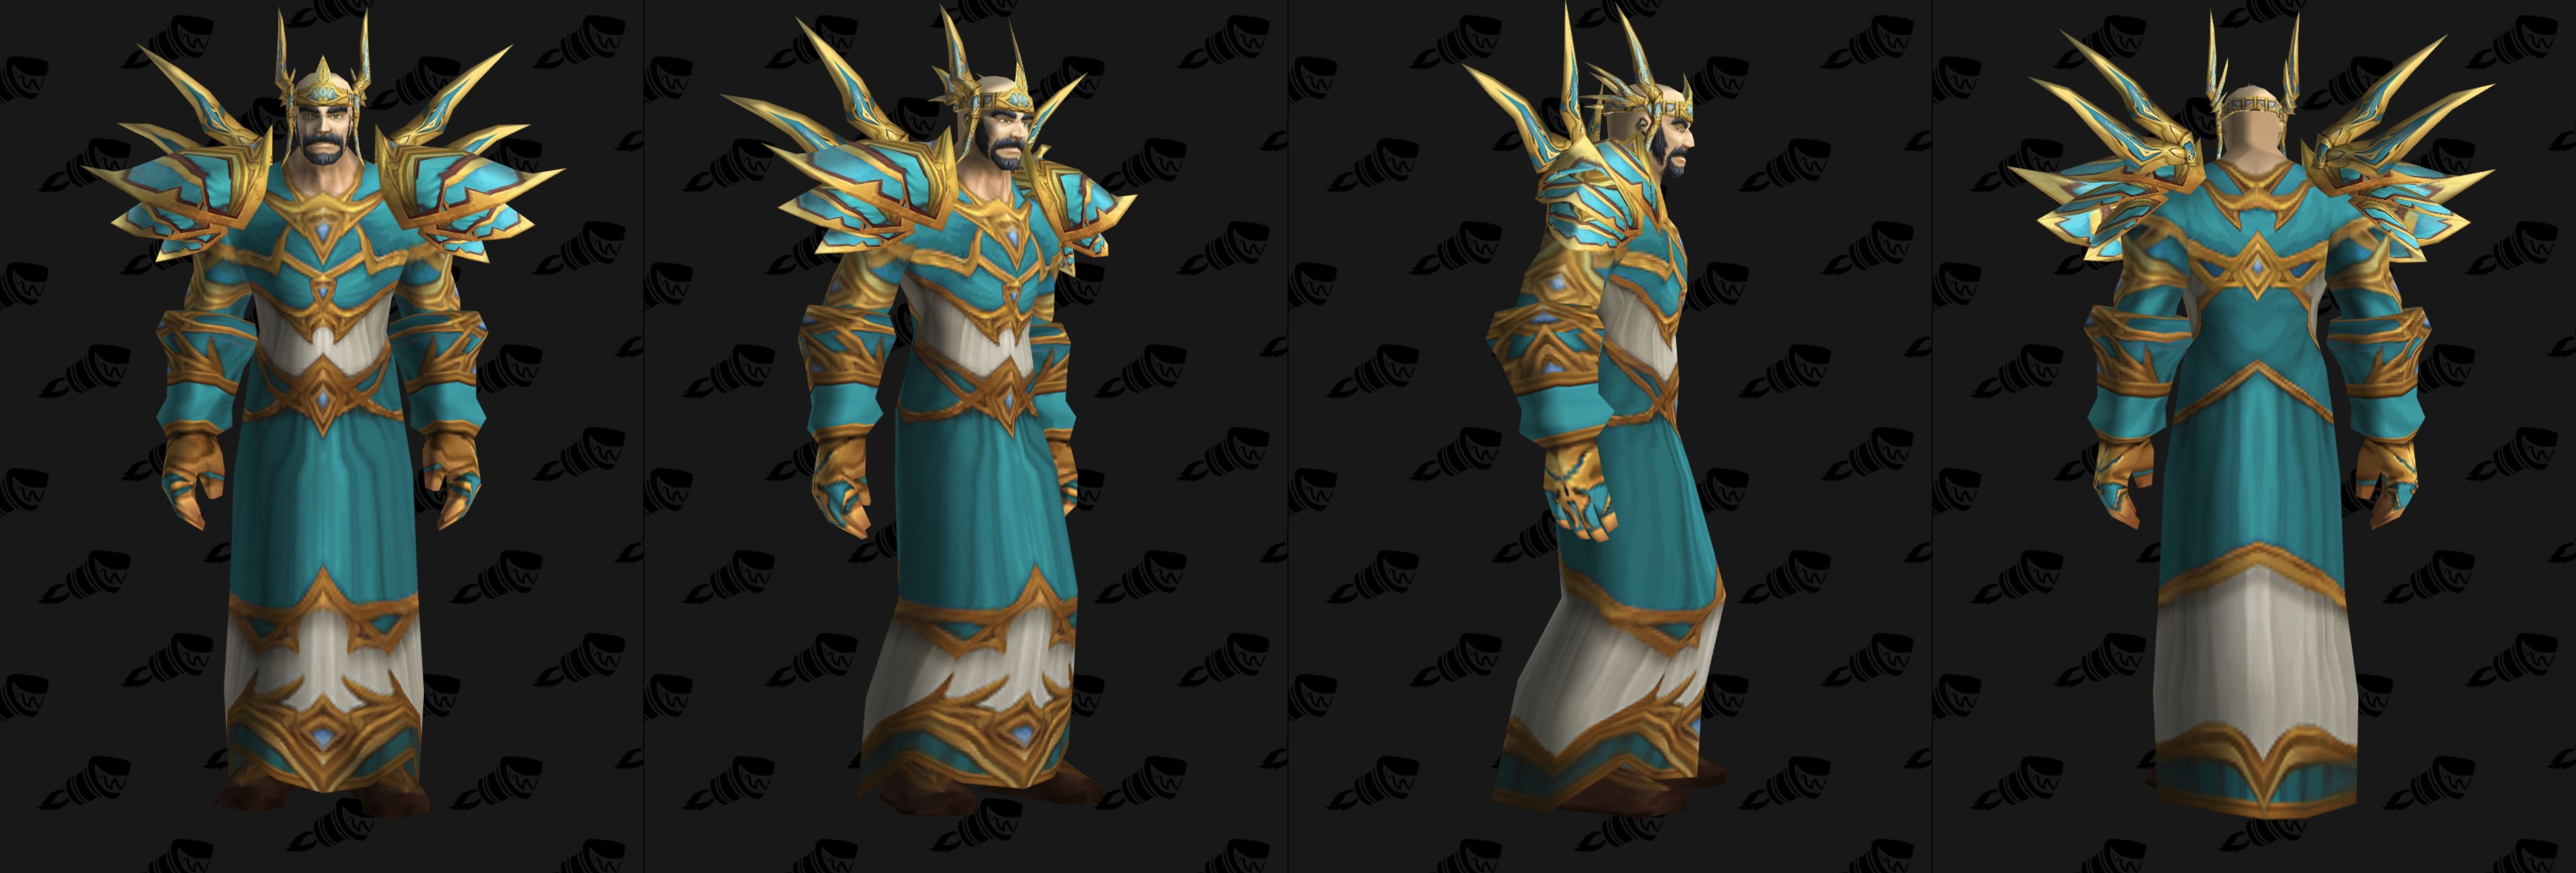 The Priest PvP Rare Armor set is called. 